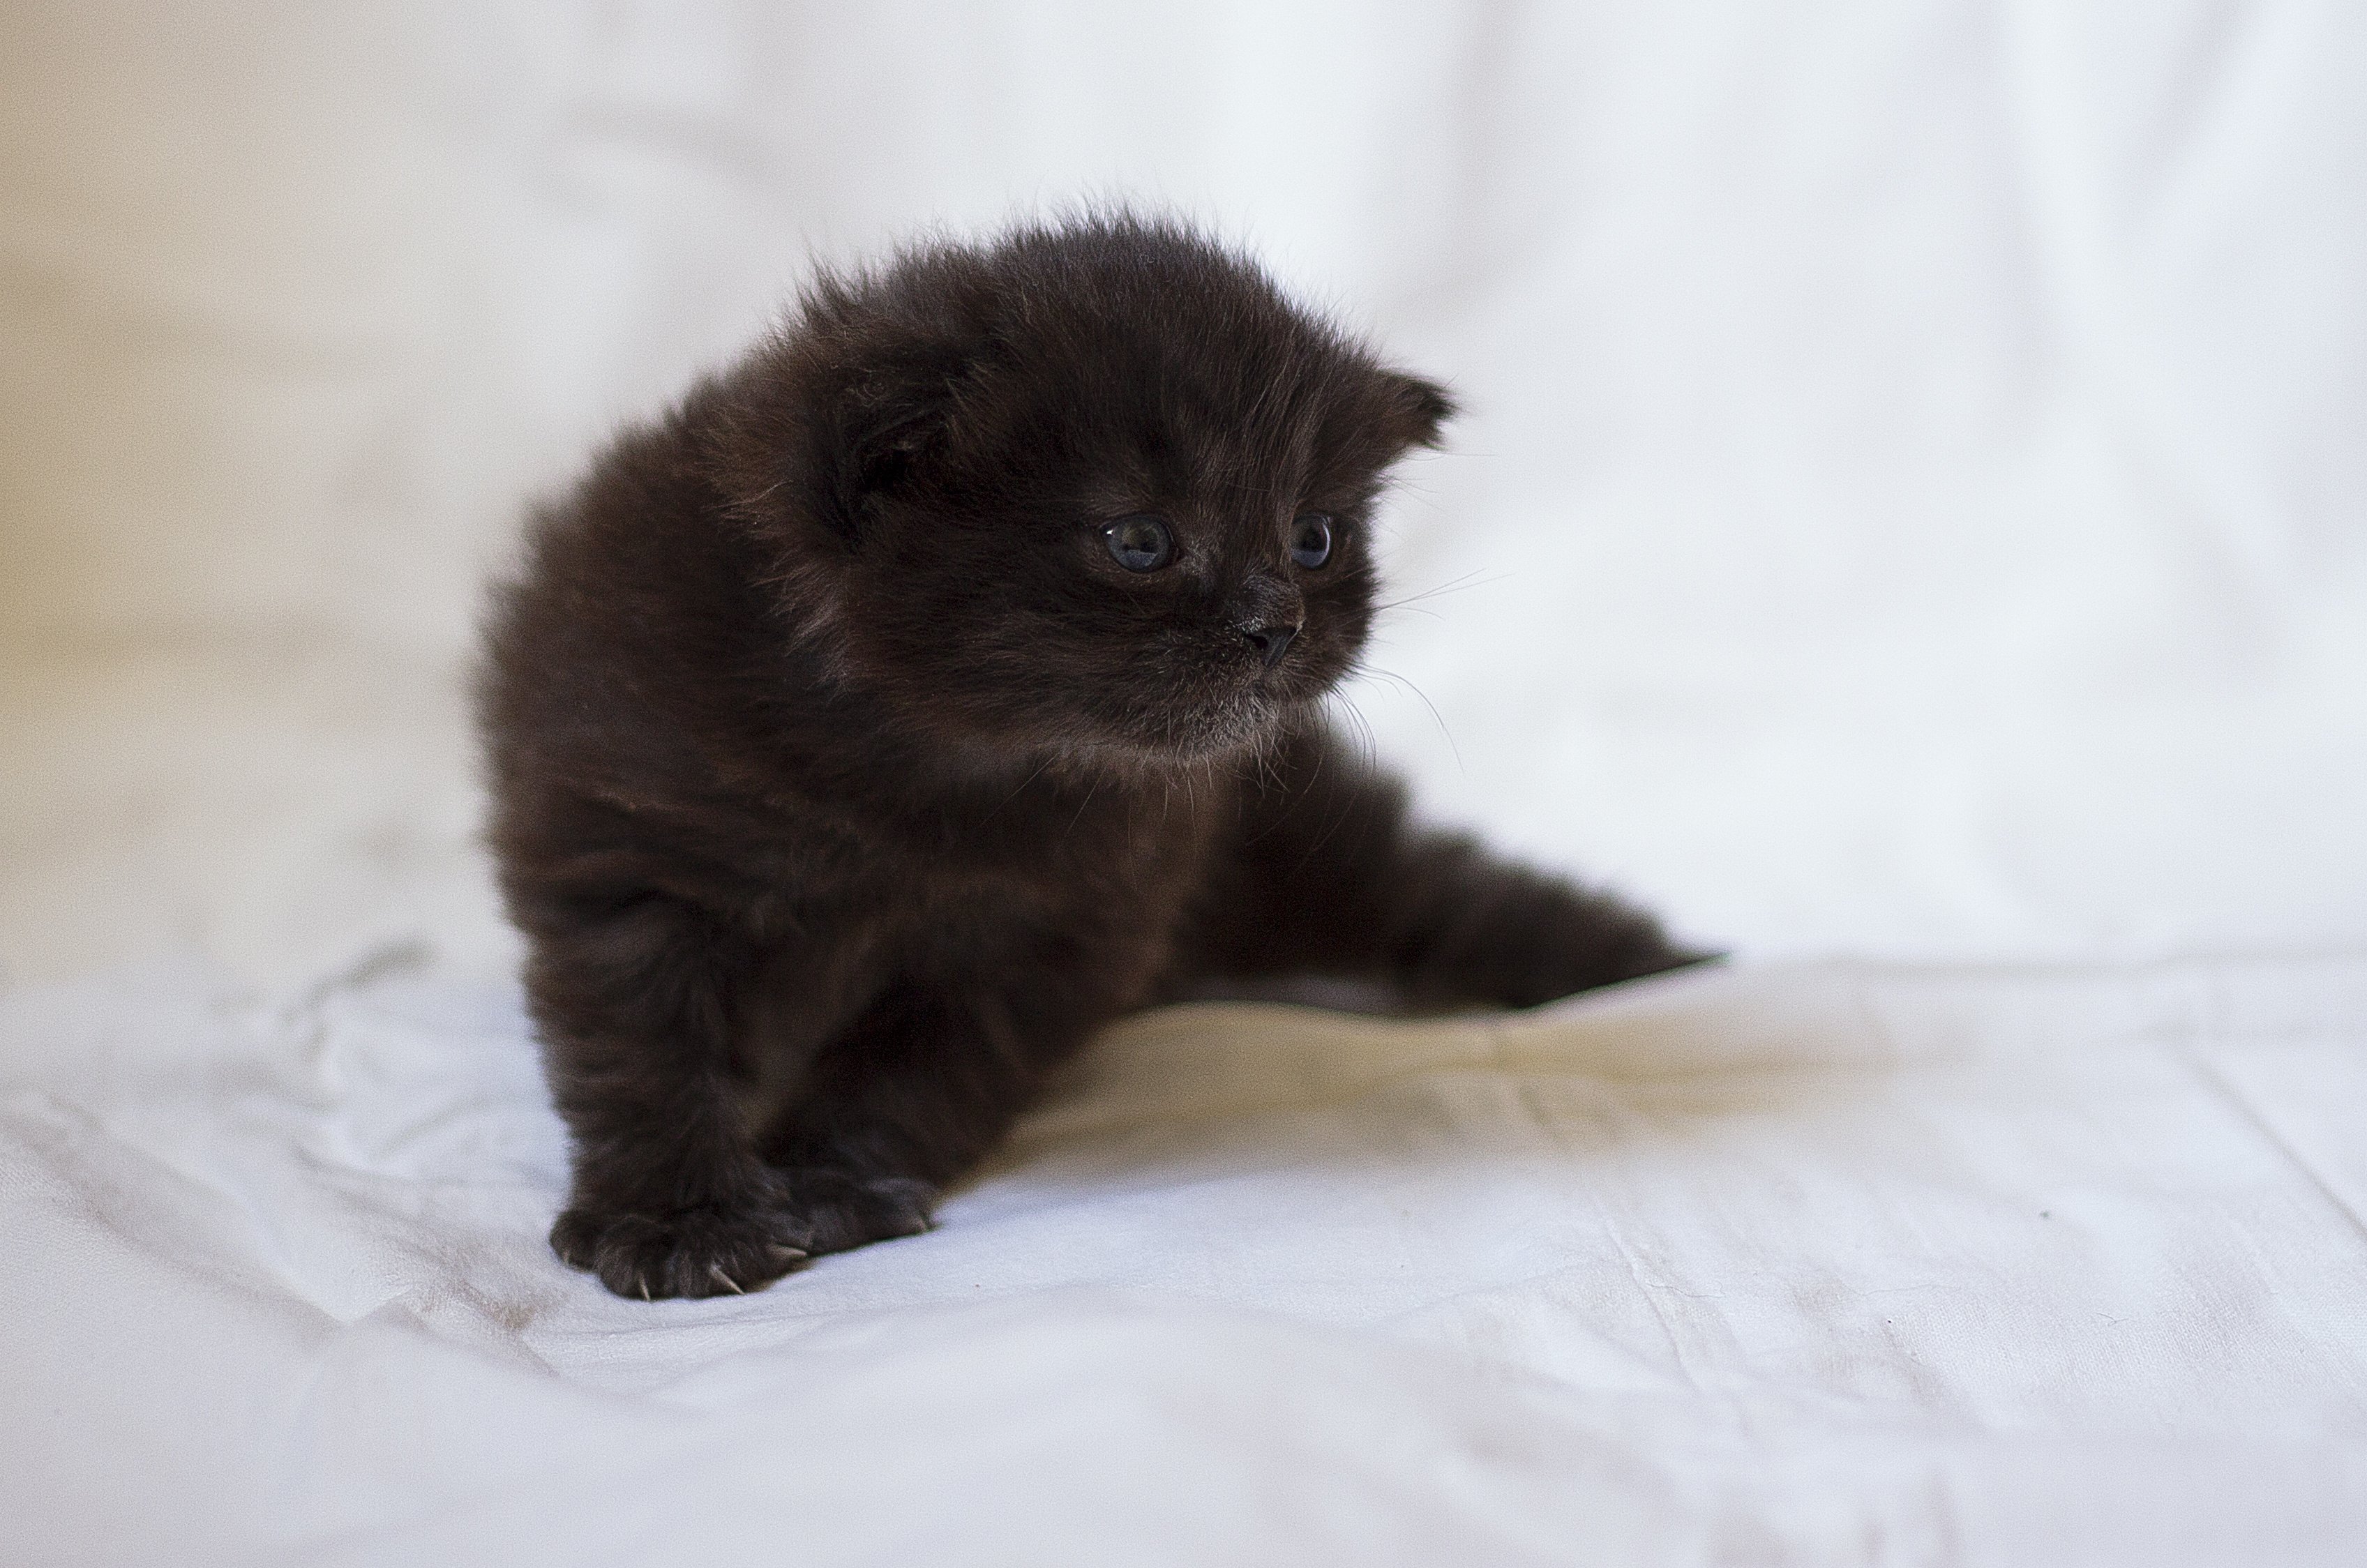 cat, Kitten, Mike, Farley, Cute, Small, Chocolate, Fluffy, Important Wallpaper